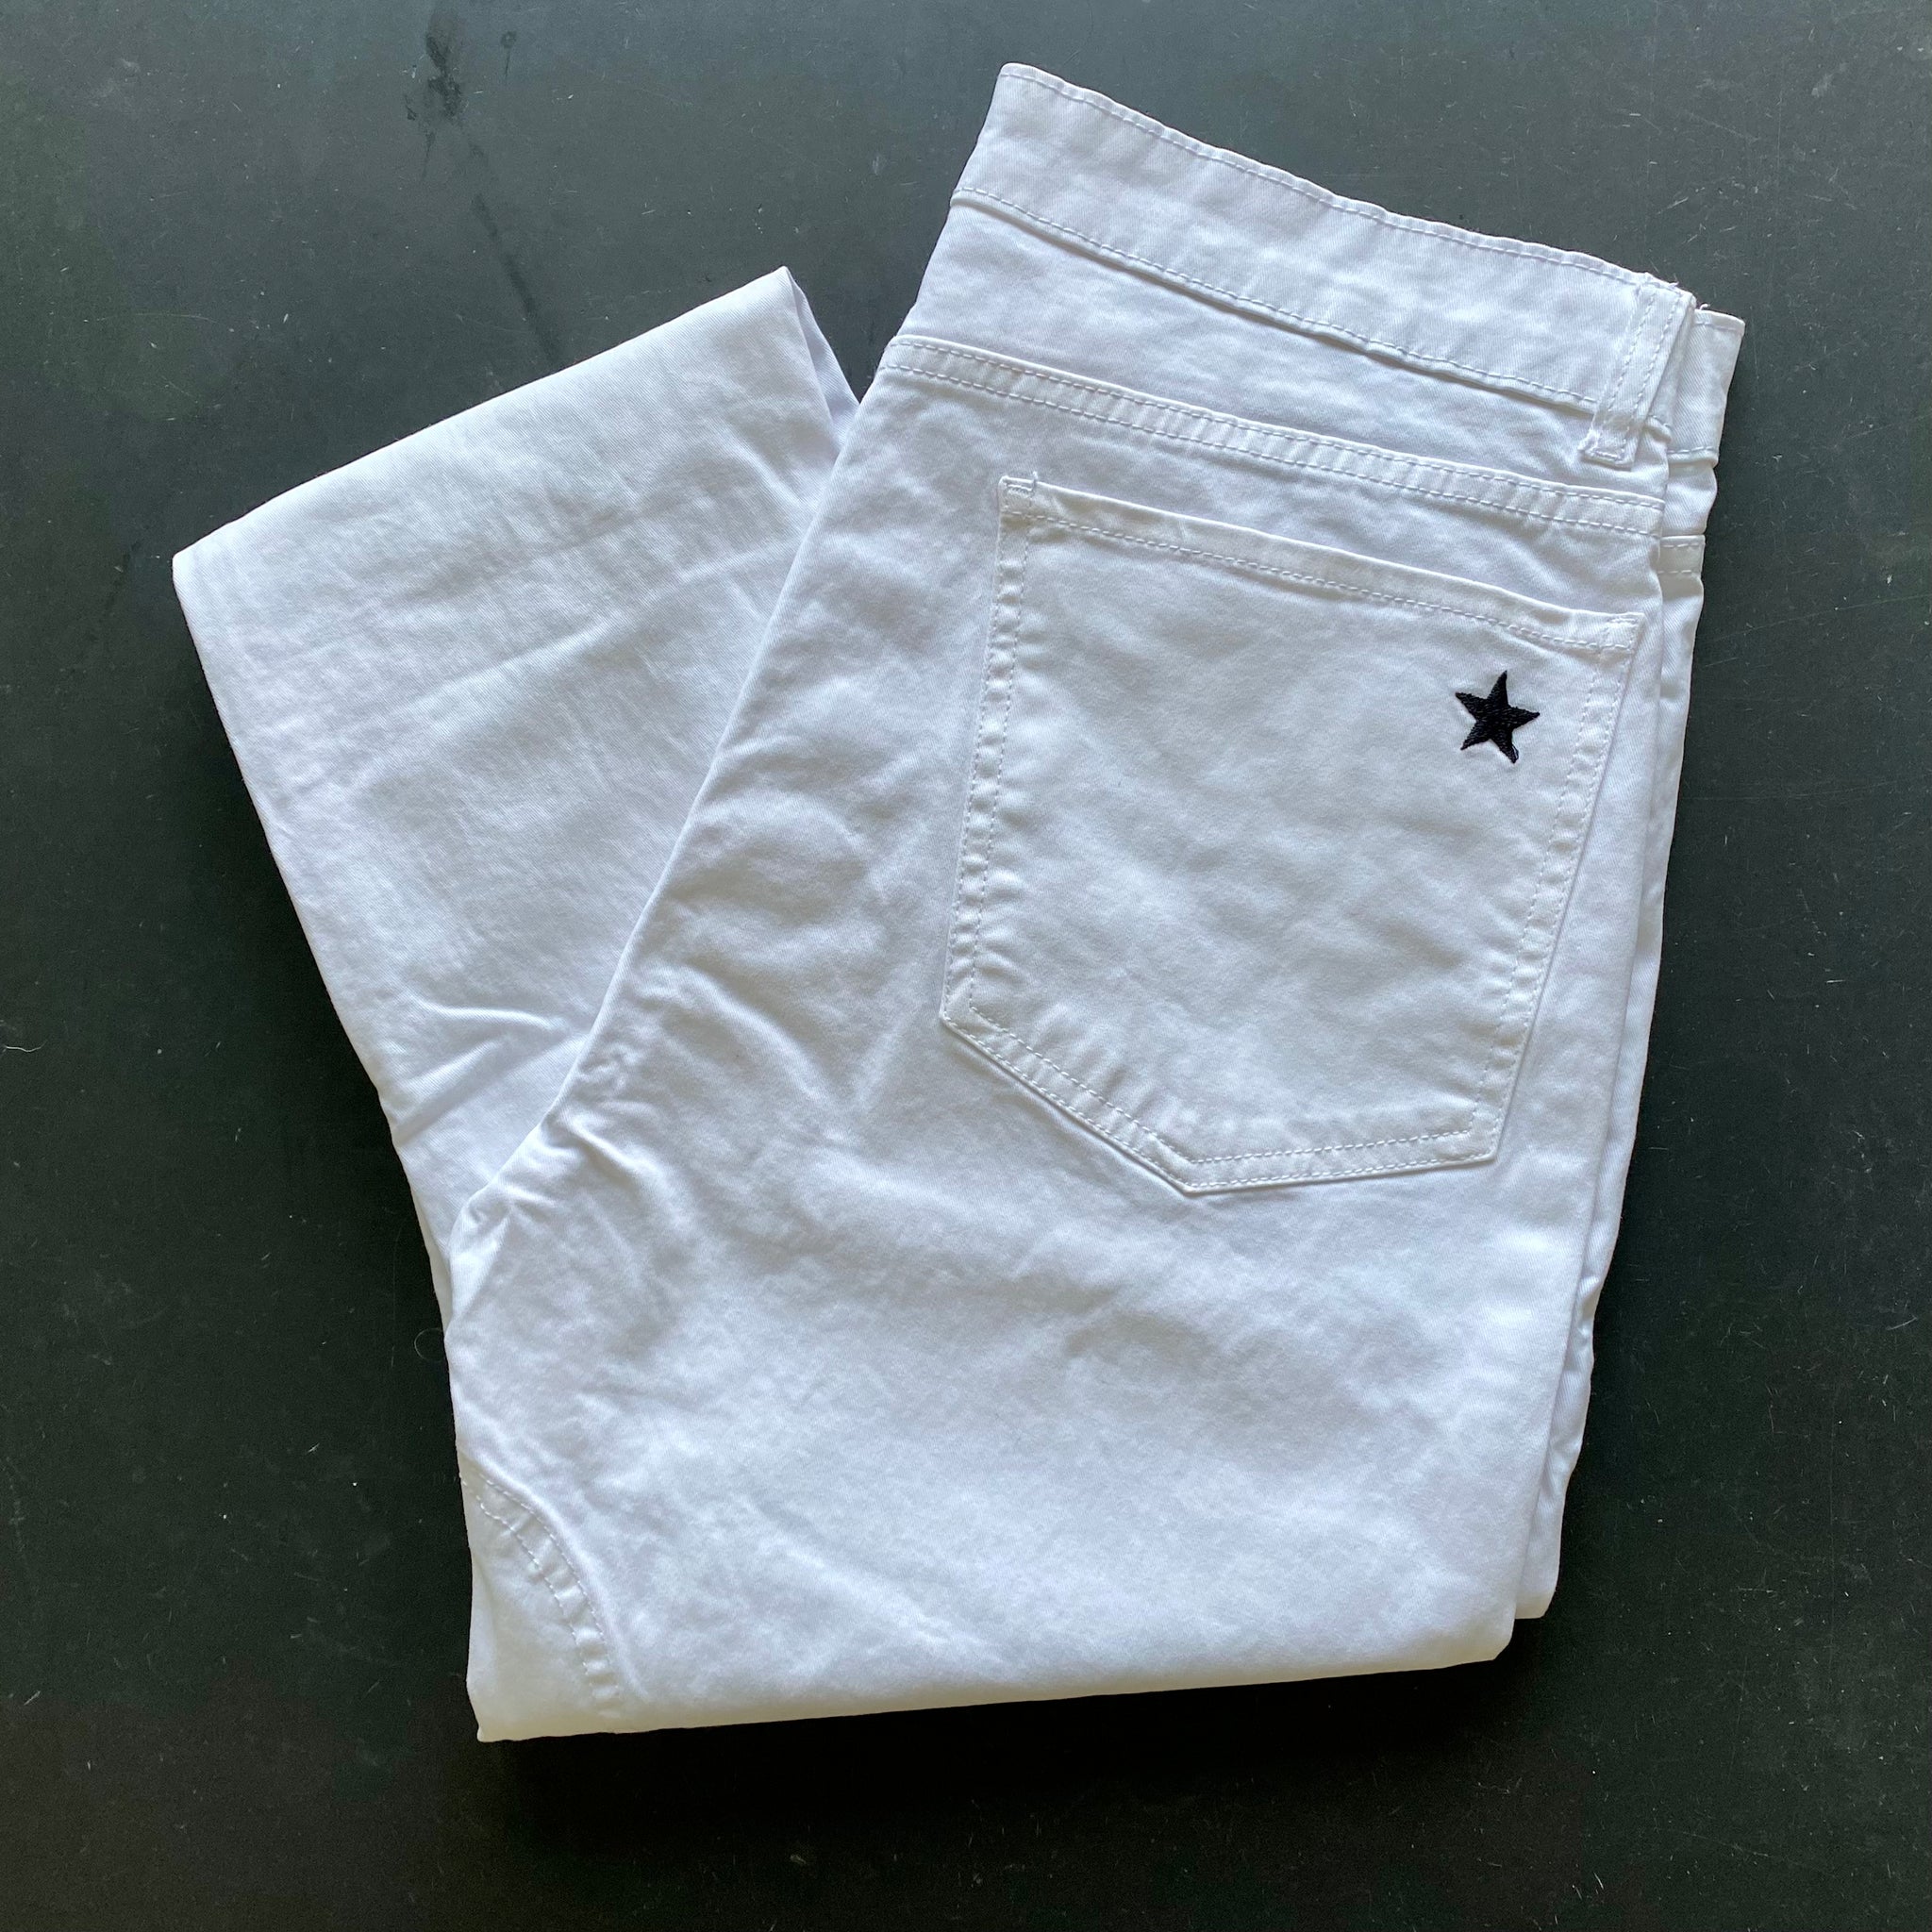 Classic Male Polo Whites with reinforcement